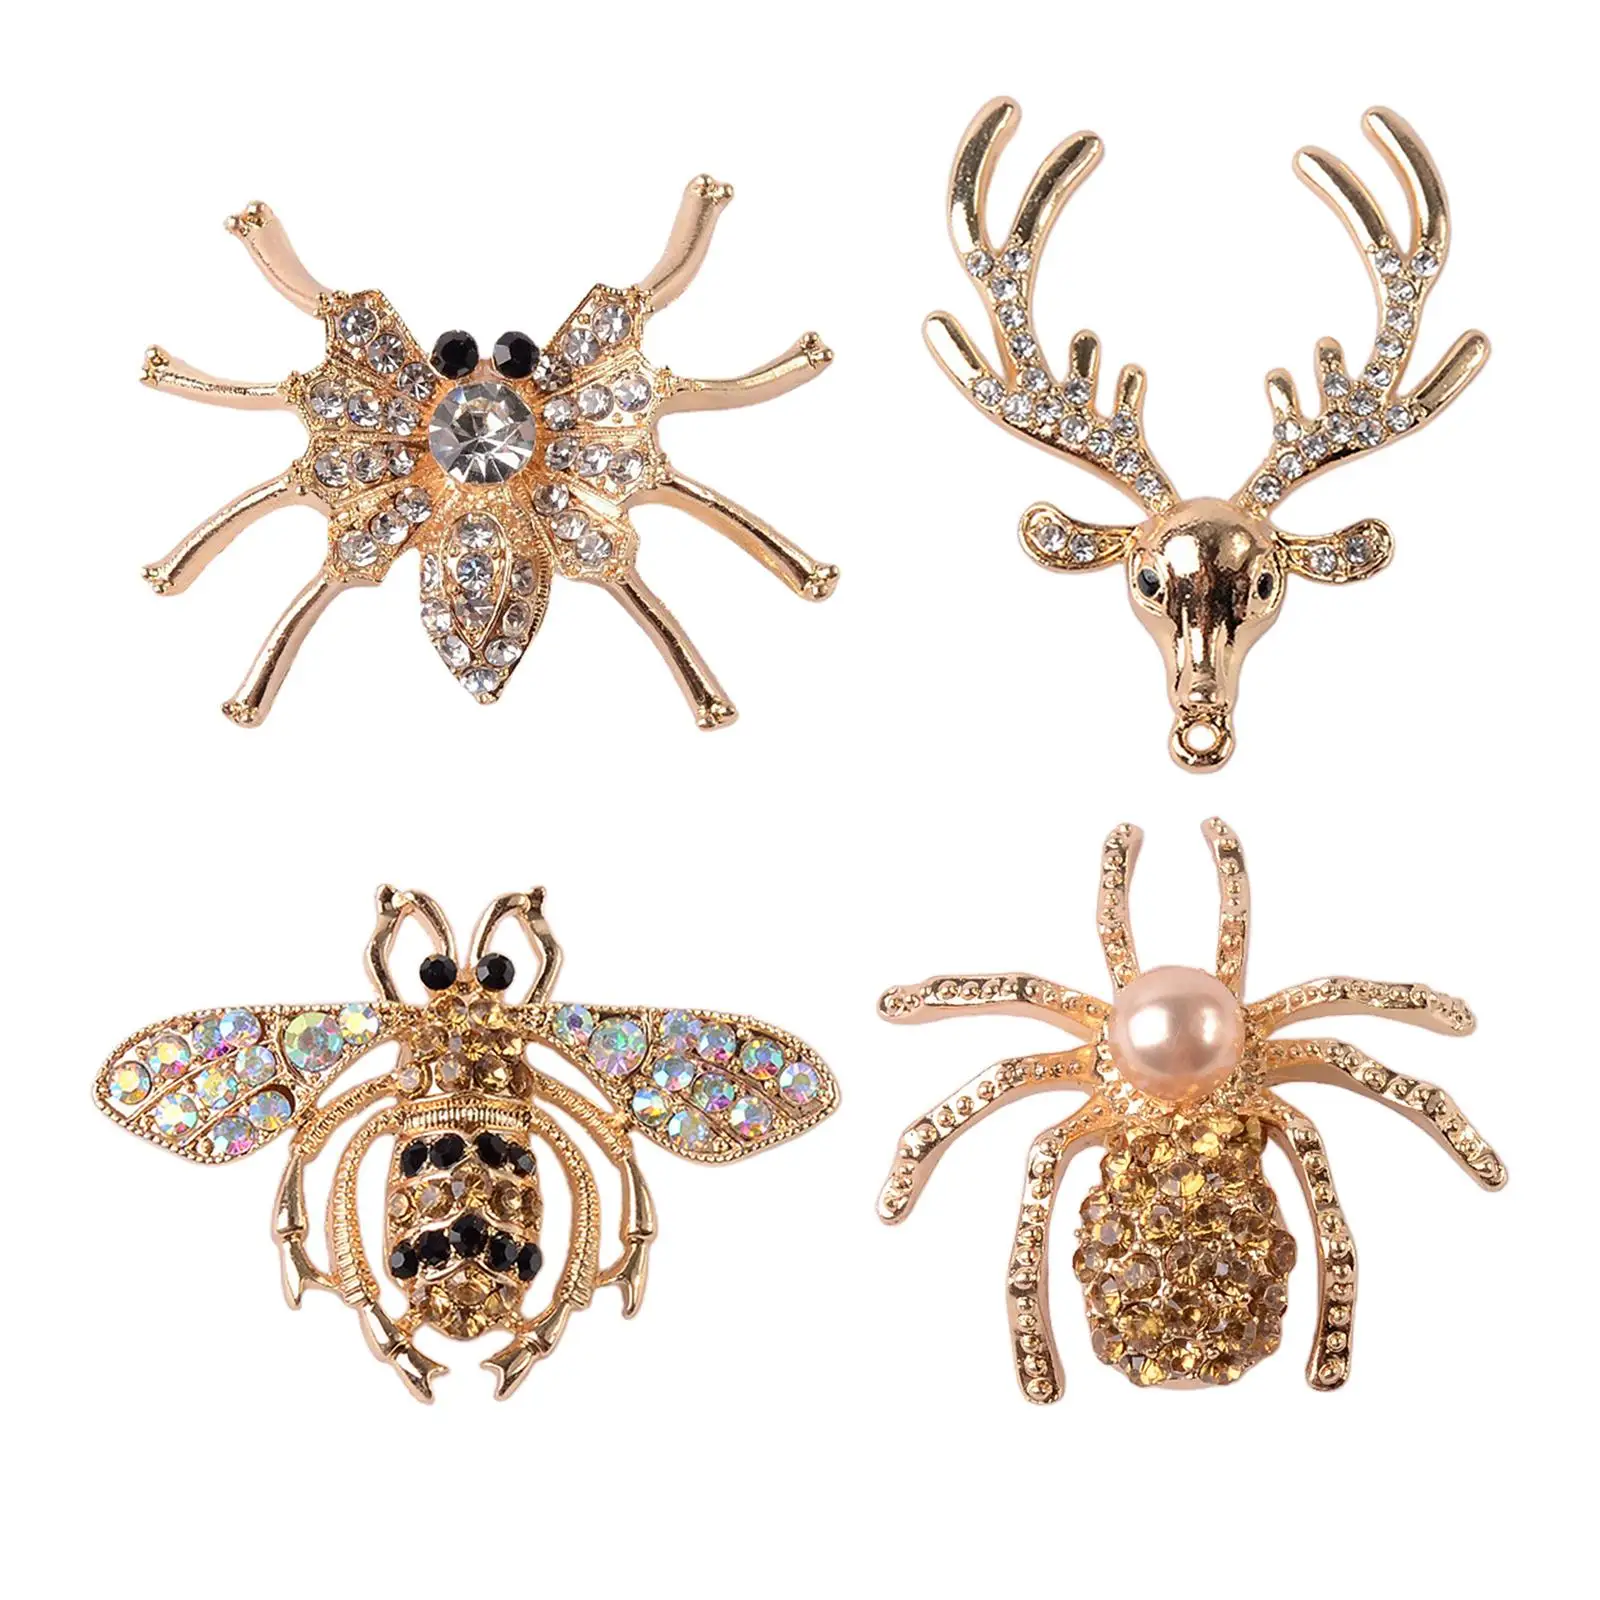 4Pcs  Spider Deer Cabochons Flatback Charms DIY Crafting for Jewelry Making  Embellishment and Party Decorations